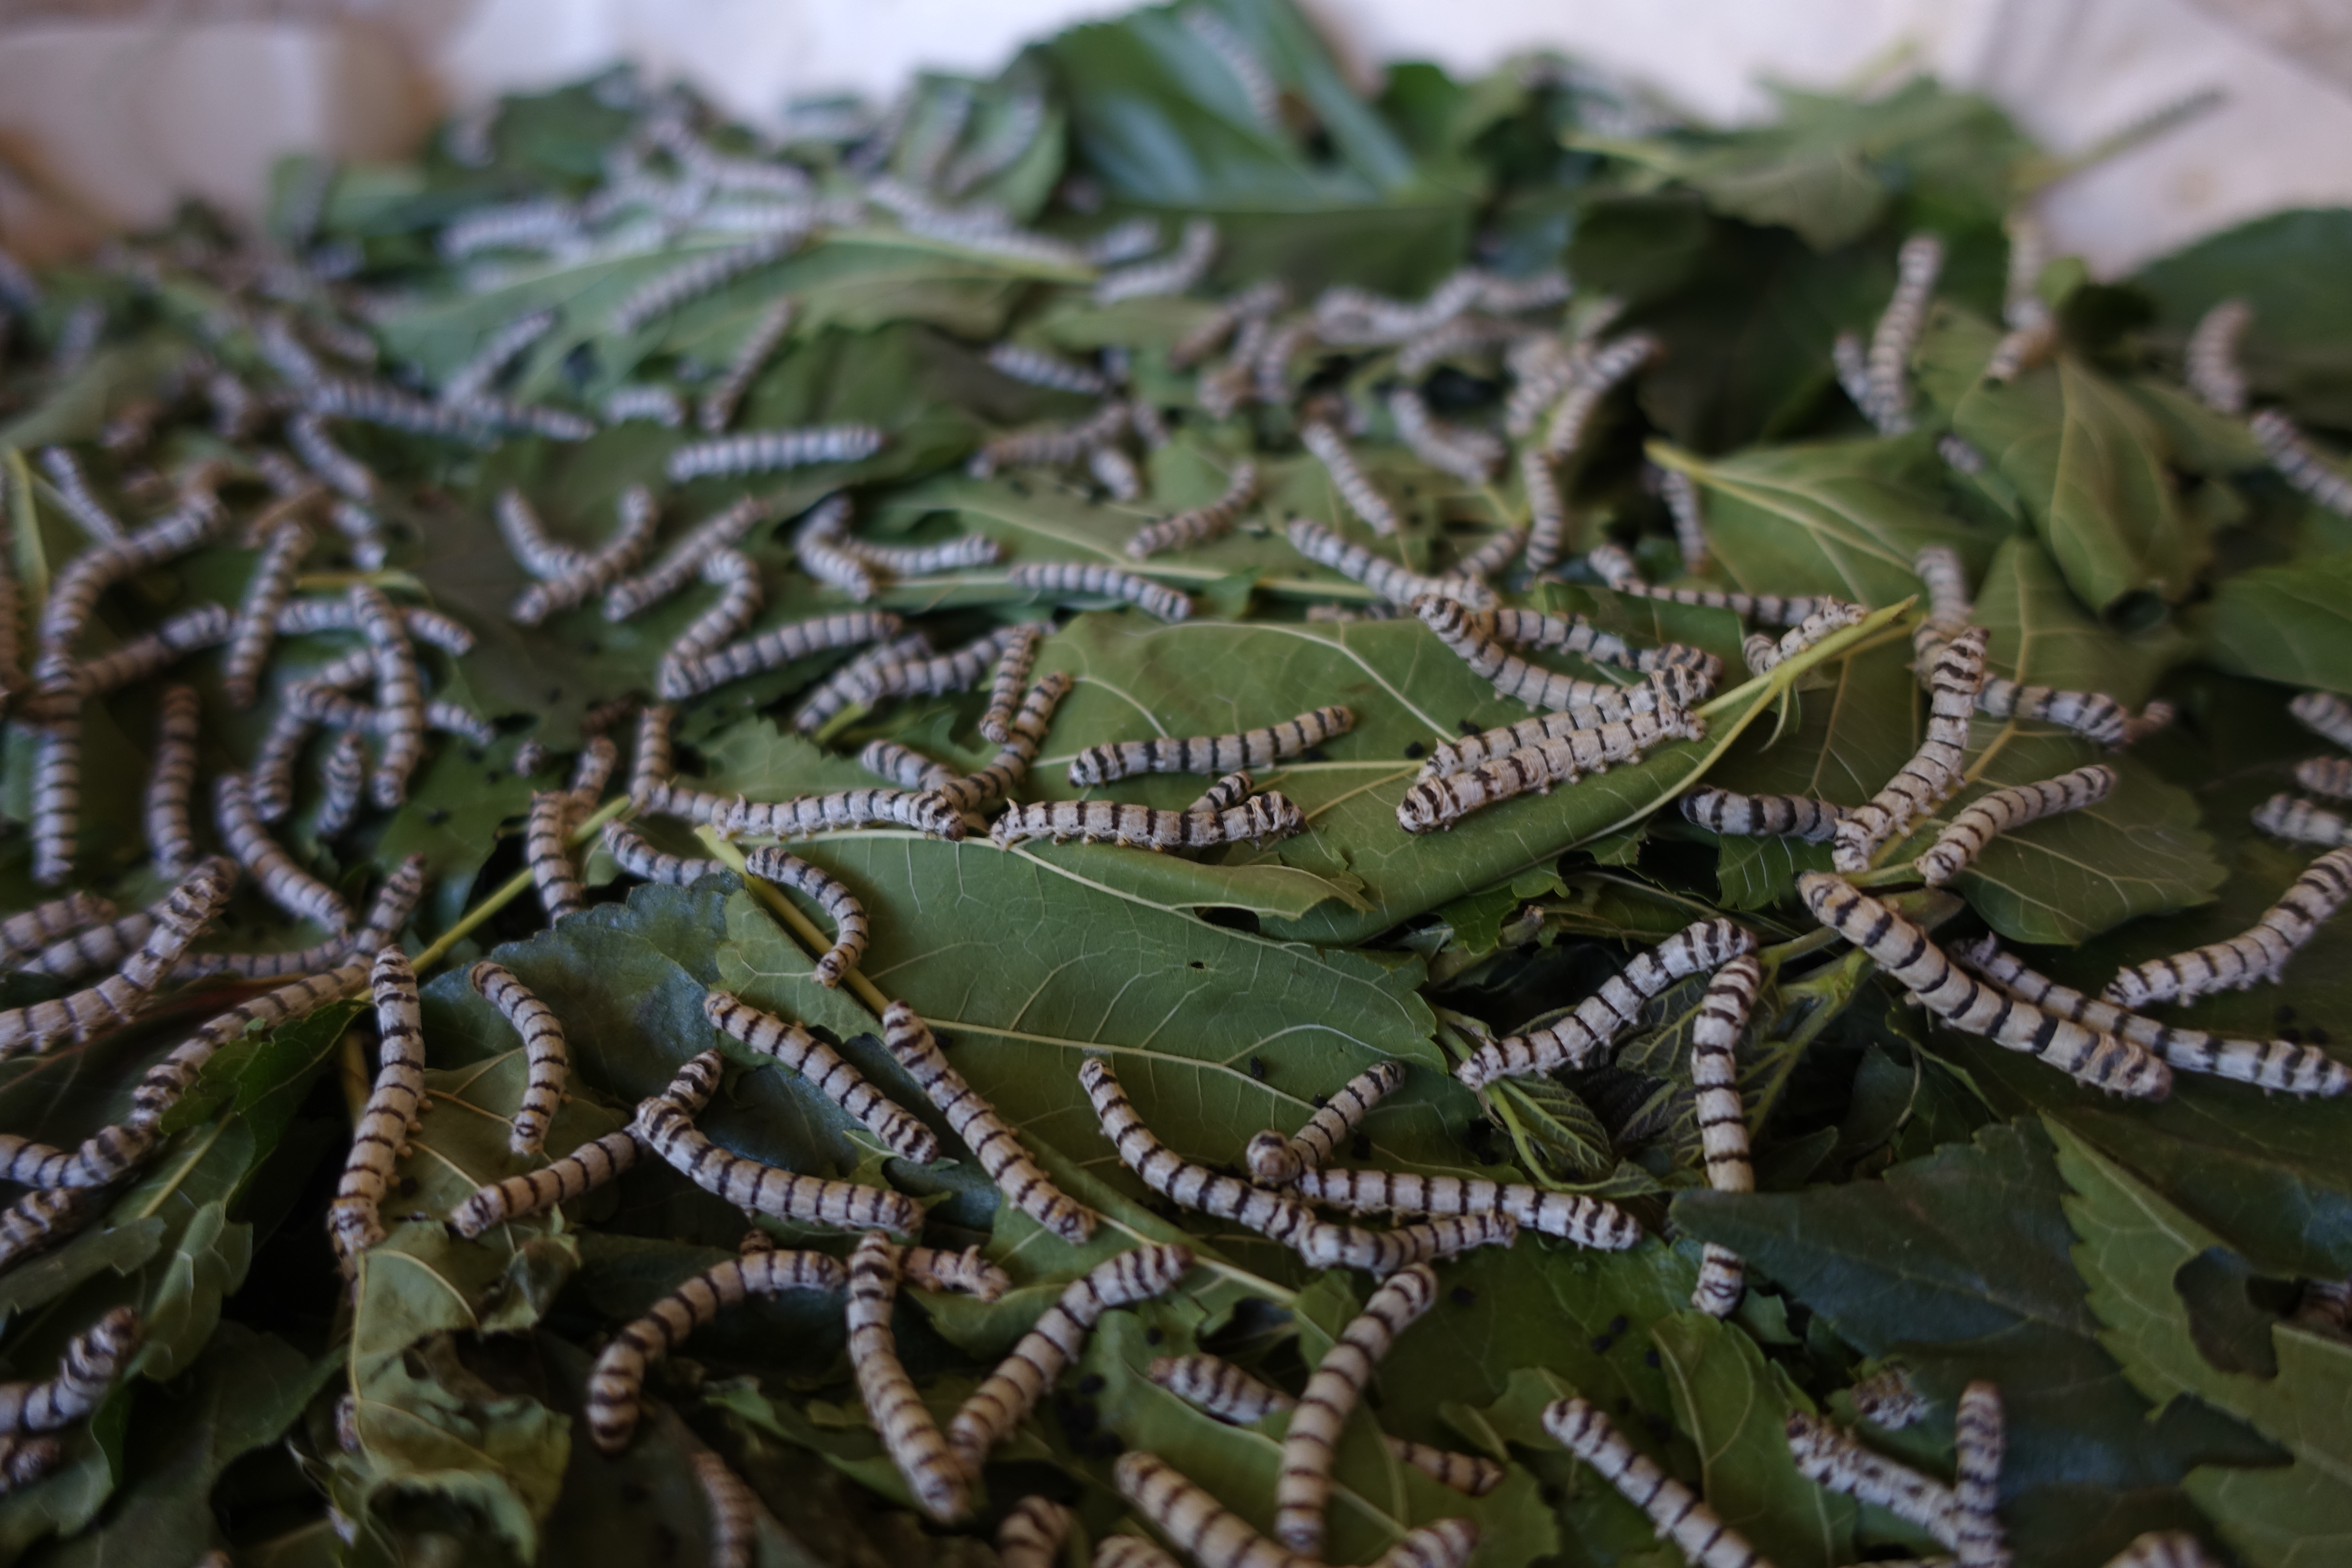 Thai silkworms exclusively eat mulberry leaves.